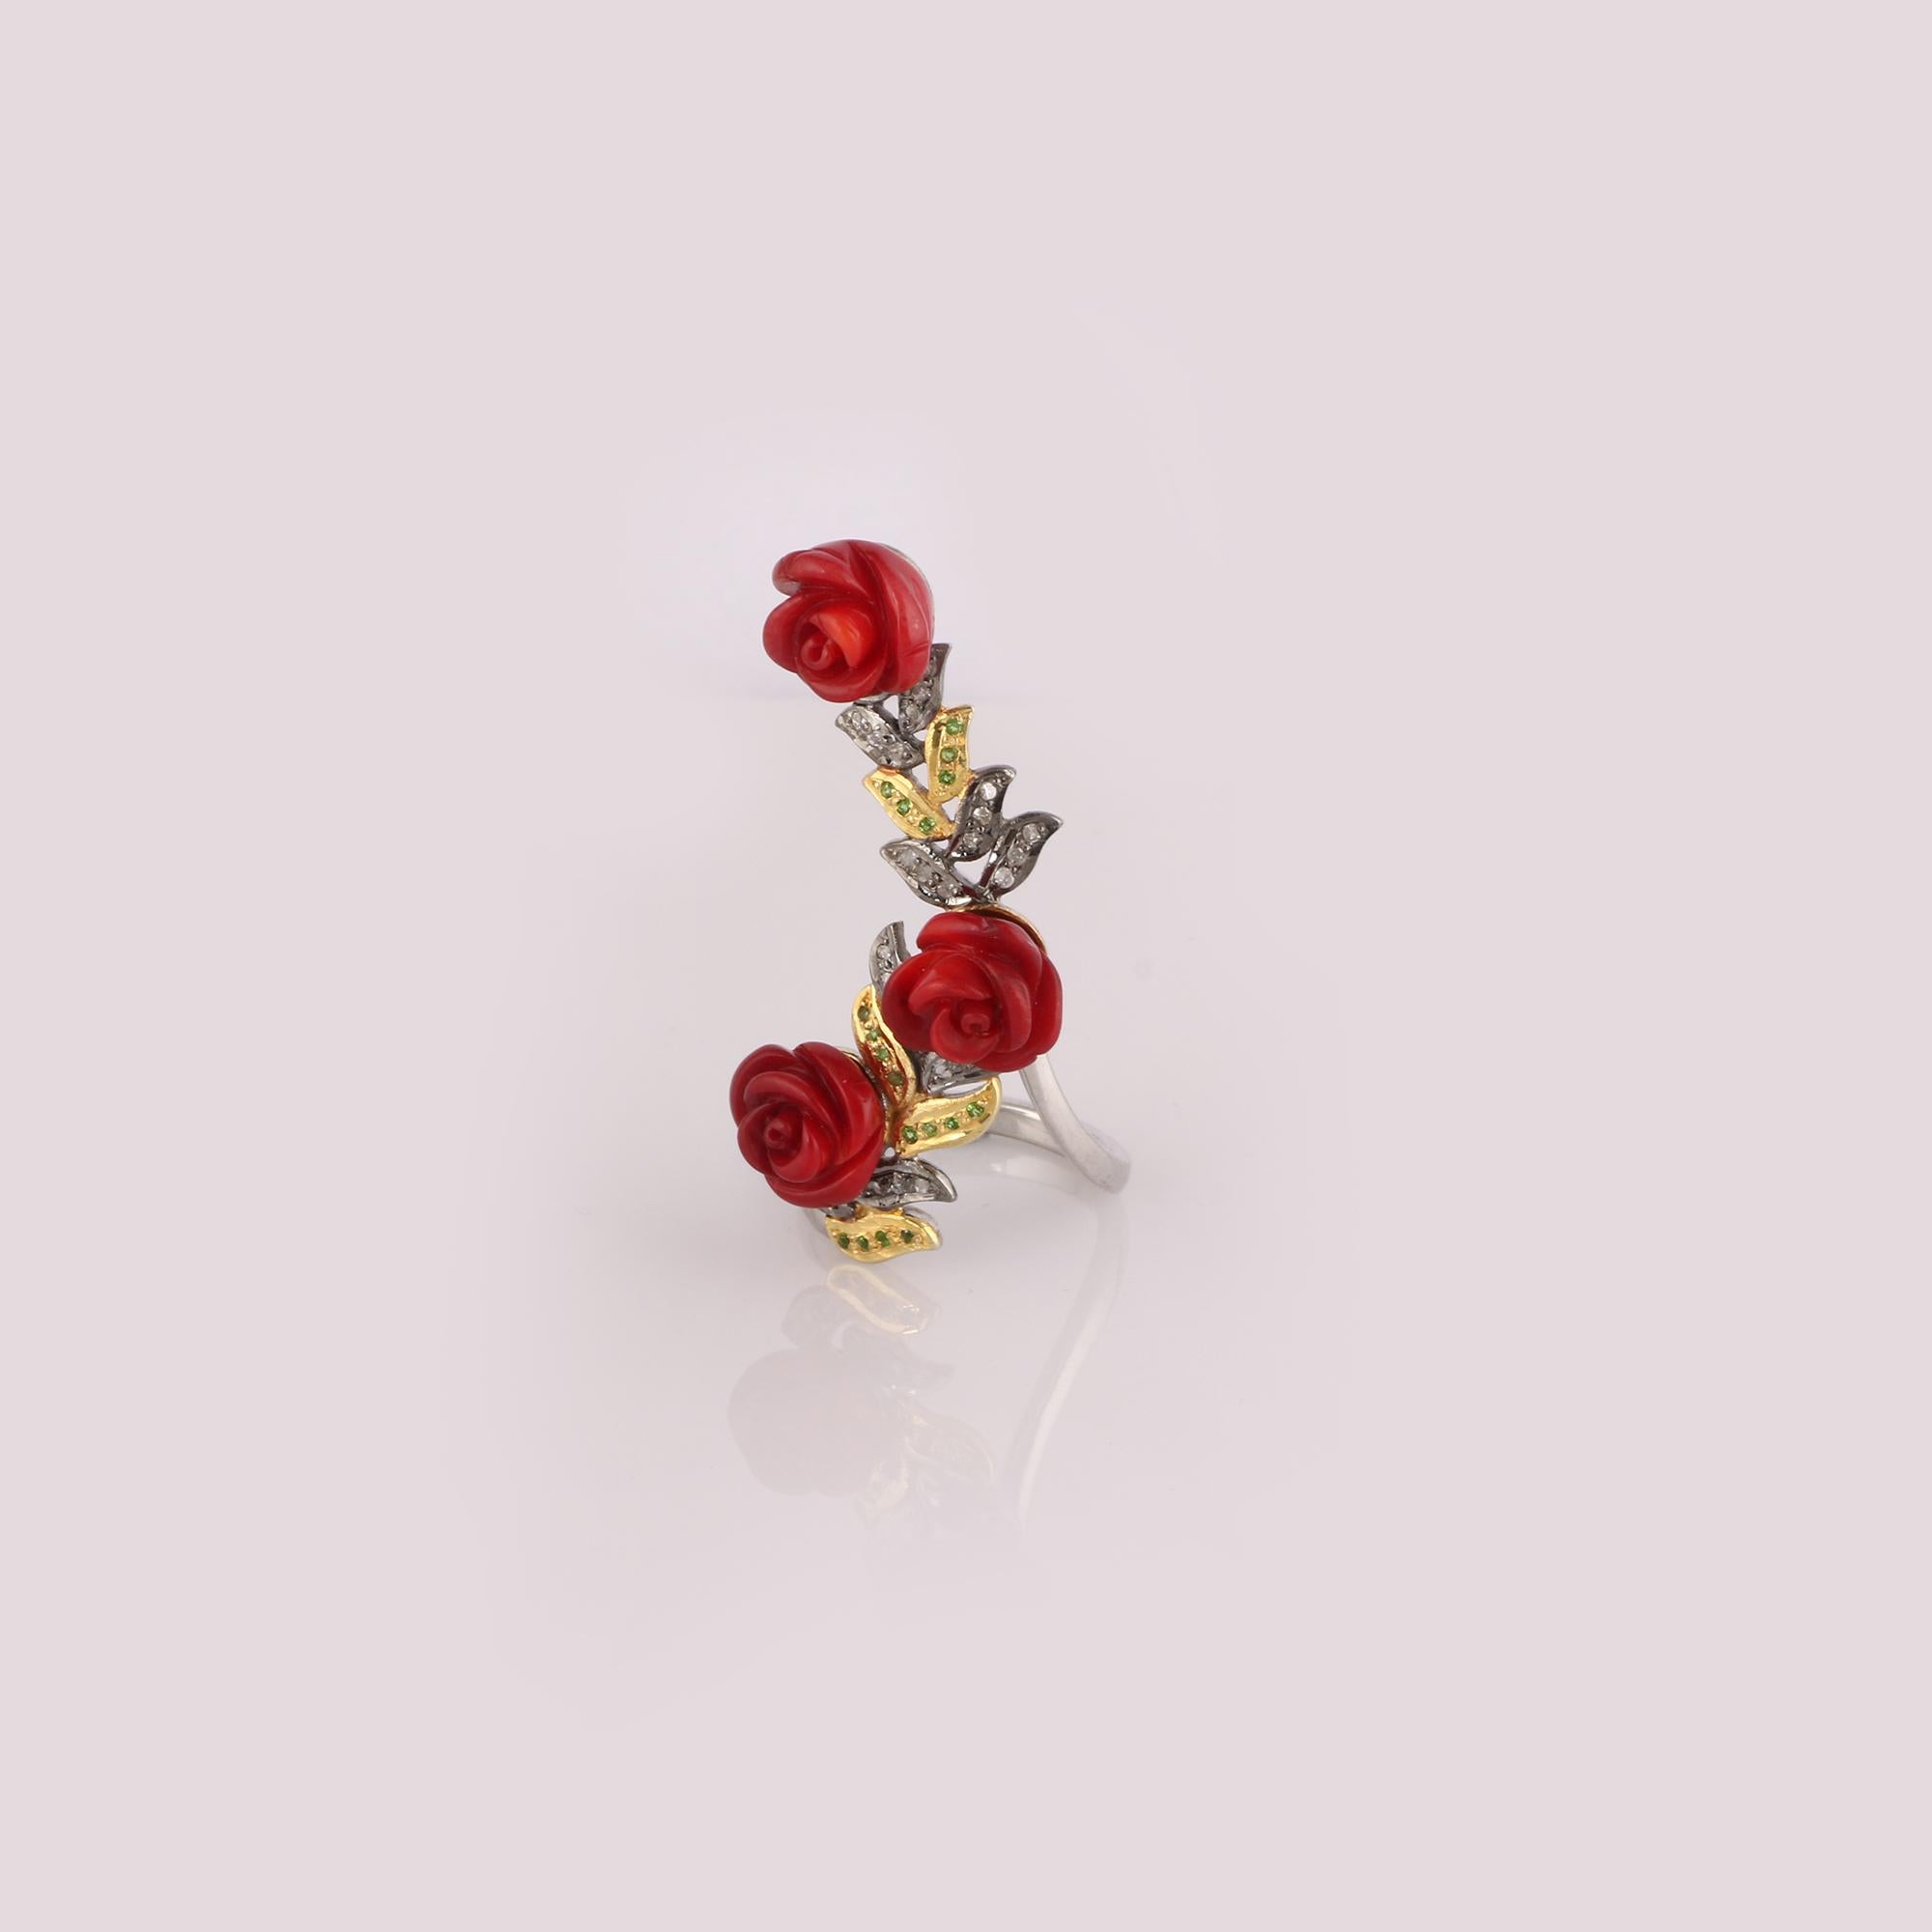 Item details:-

✦ SKU:- ESRG00225

✦ Material :- 925 Sterling Silver
✦ Gemstone Specification:-
✧ Diamond
✧ Coral

✦ Approx. Diamond Weight : 0.2
✦ Approx. Silver Weight : 6.99
✦ Approx. Gross Weight : 10.05

Ring Size (US): 7

You will Get the same